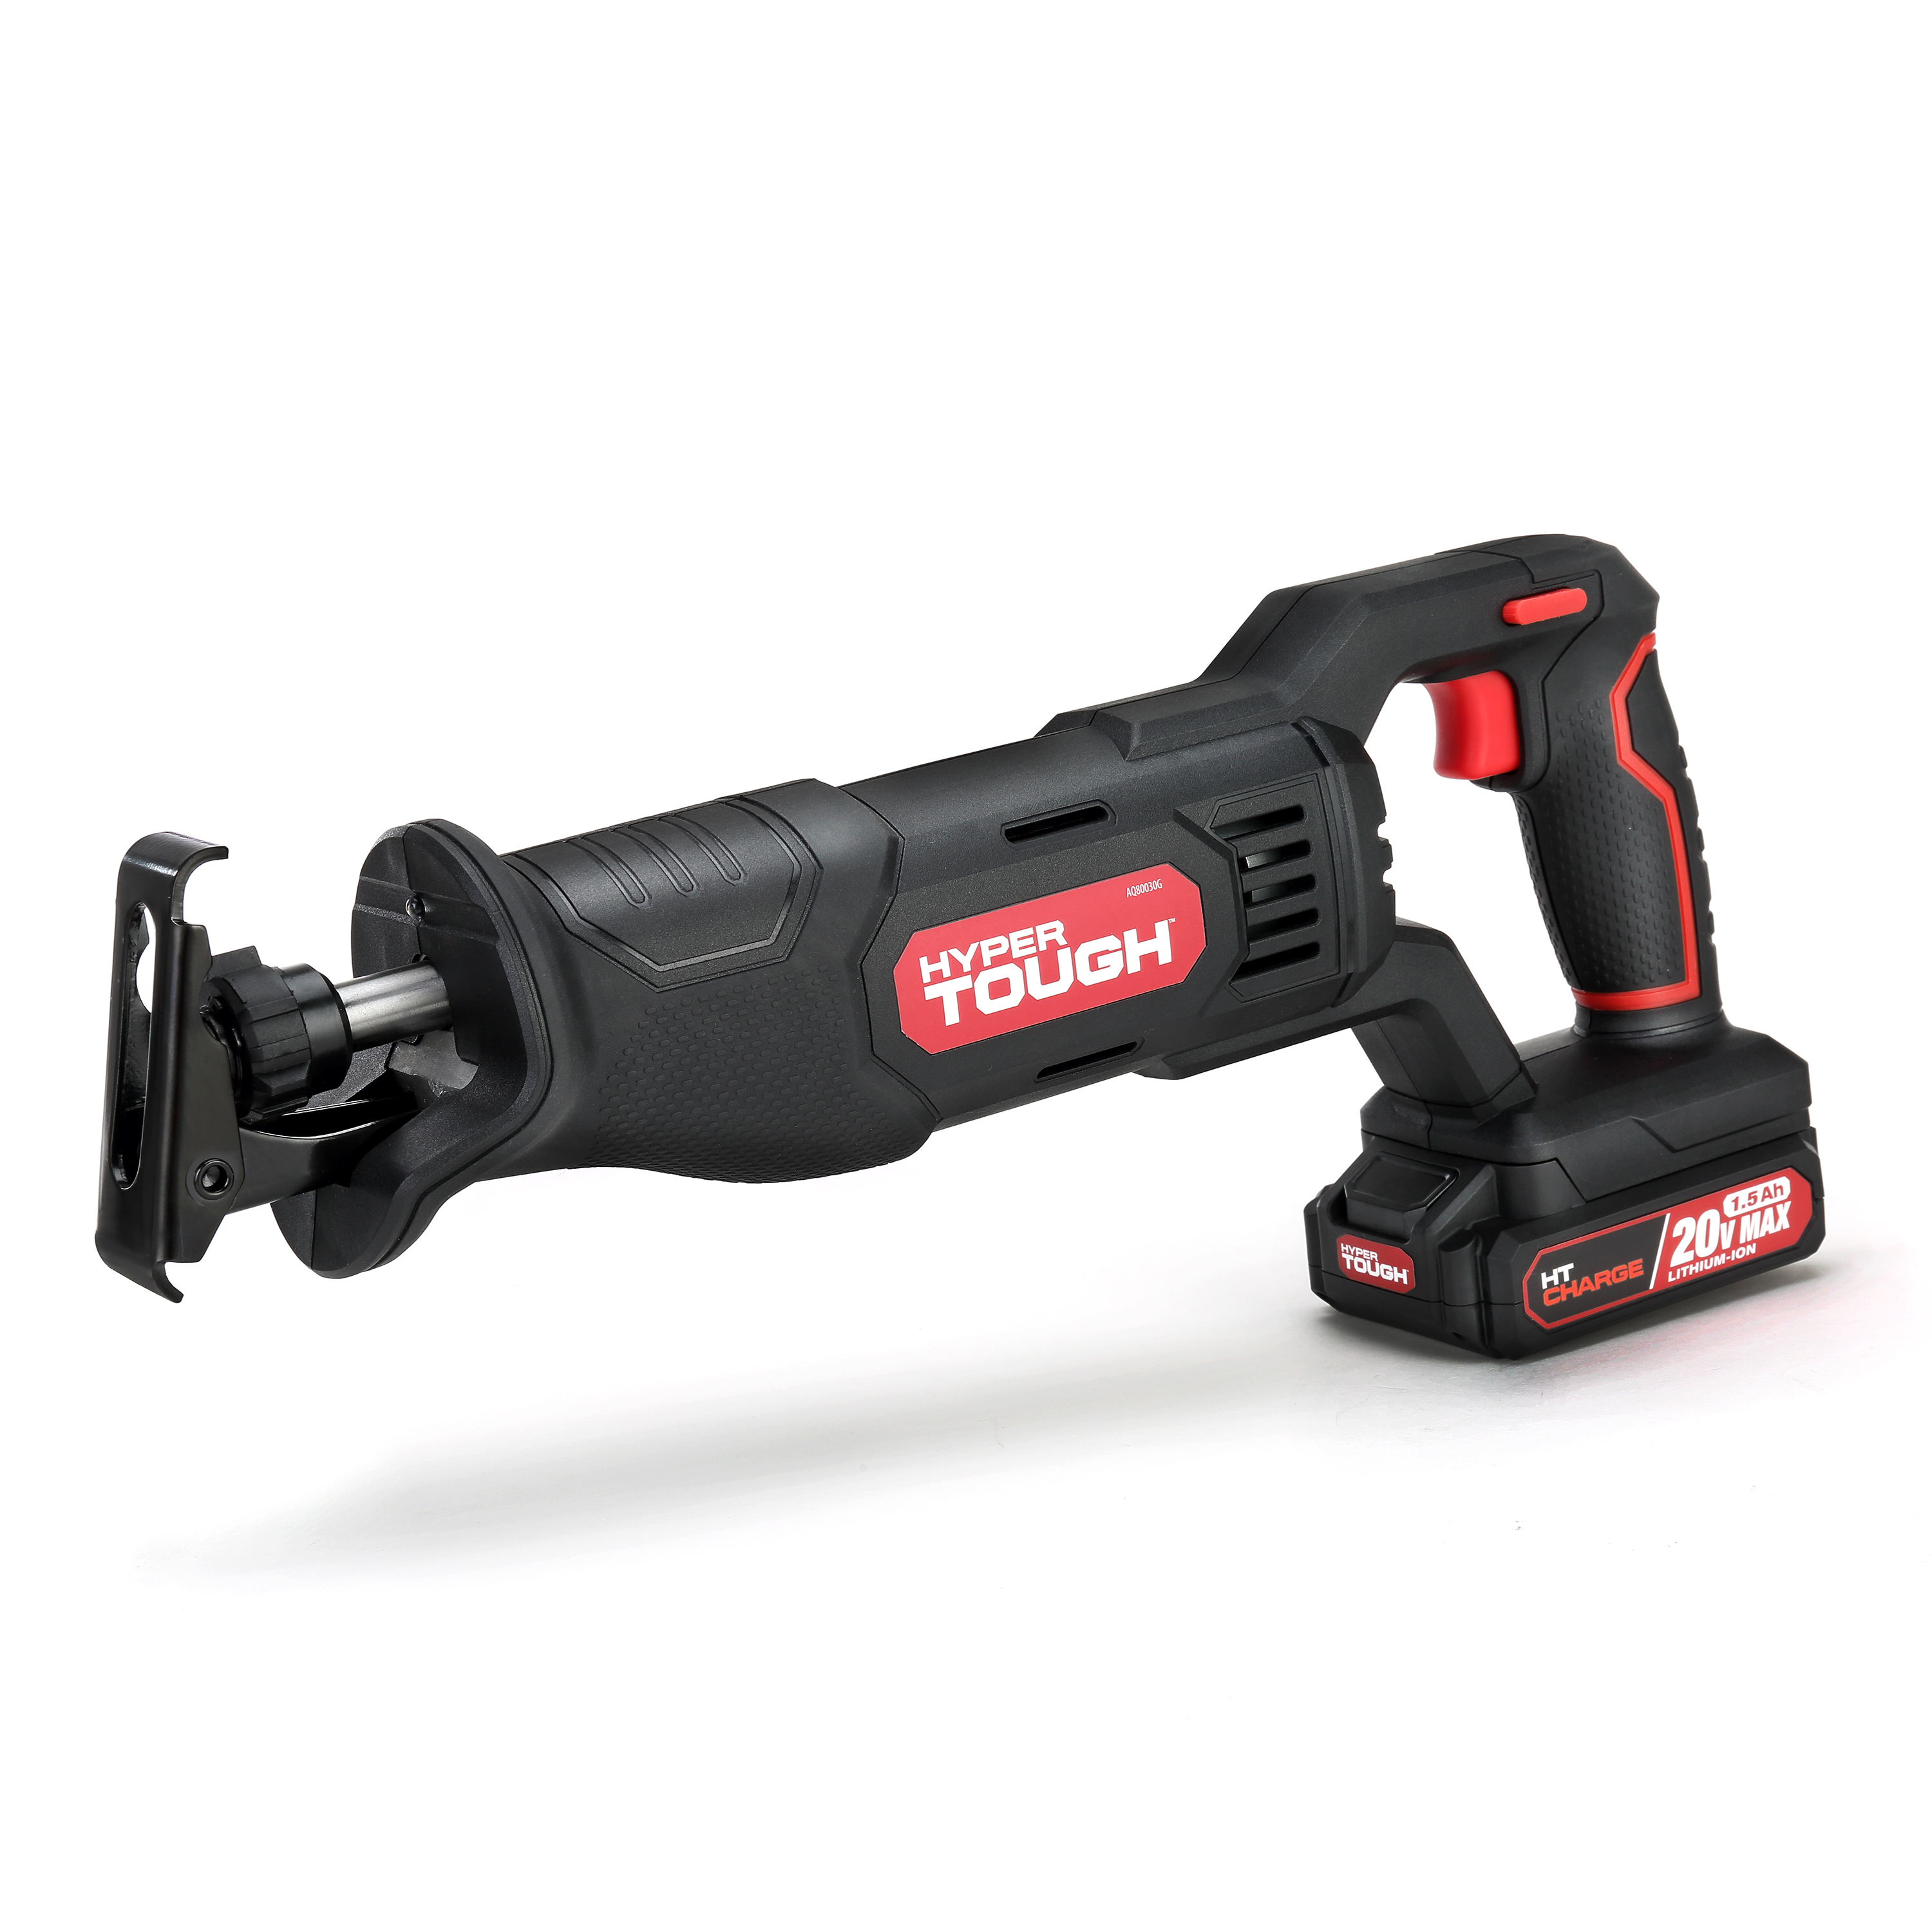 Hyper Tough 20V Max Lithium-ion Cordless Reciprocating Saw, Variable Speed, Keyless Blade Change, with 1.5Ah Lithium-Ion Battery and Charger, Wood Blade and LED Light - image 1 of 28